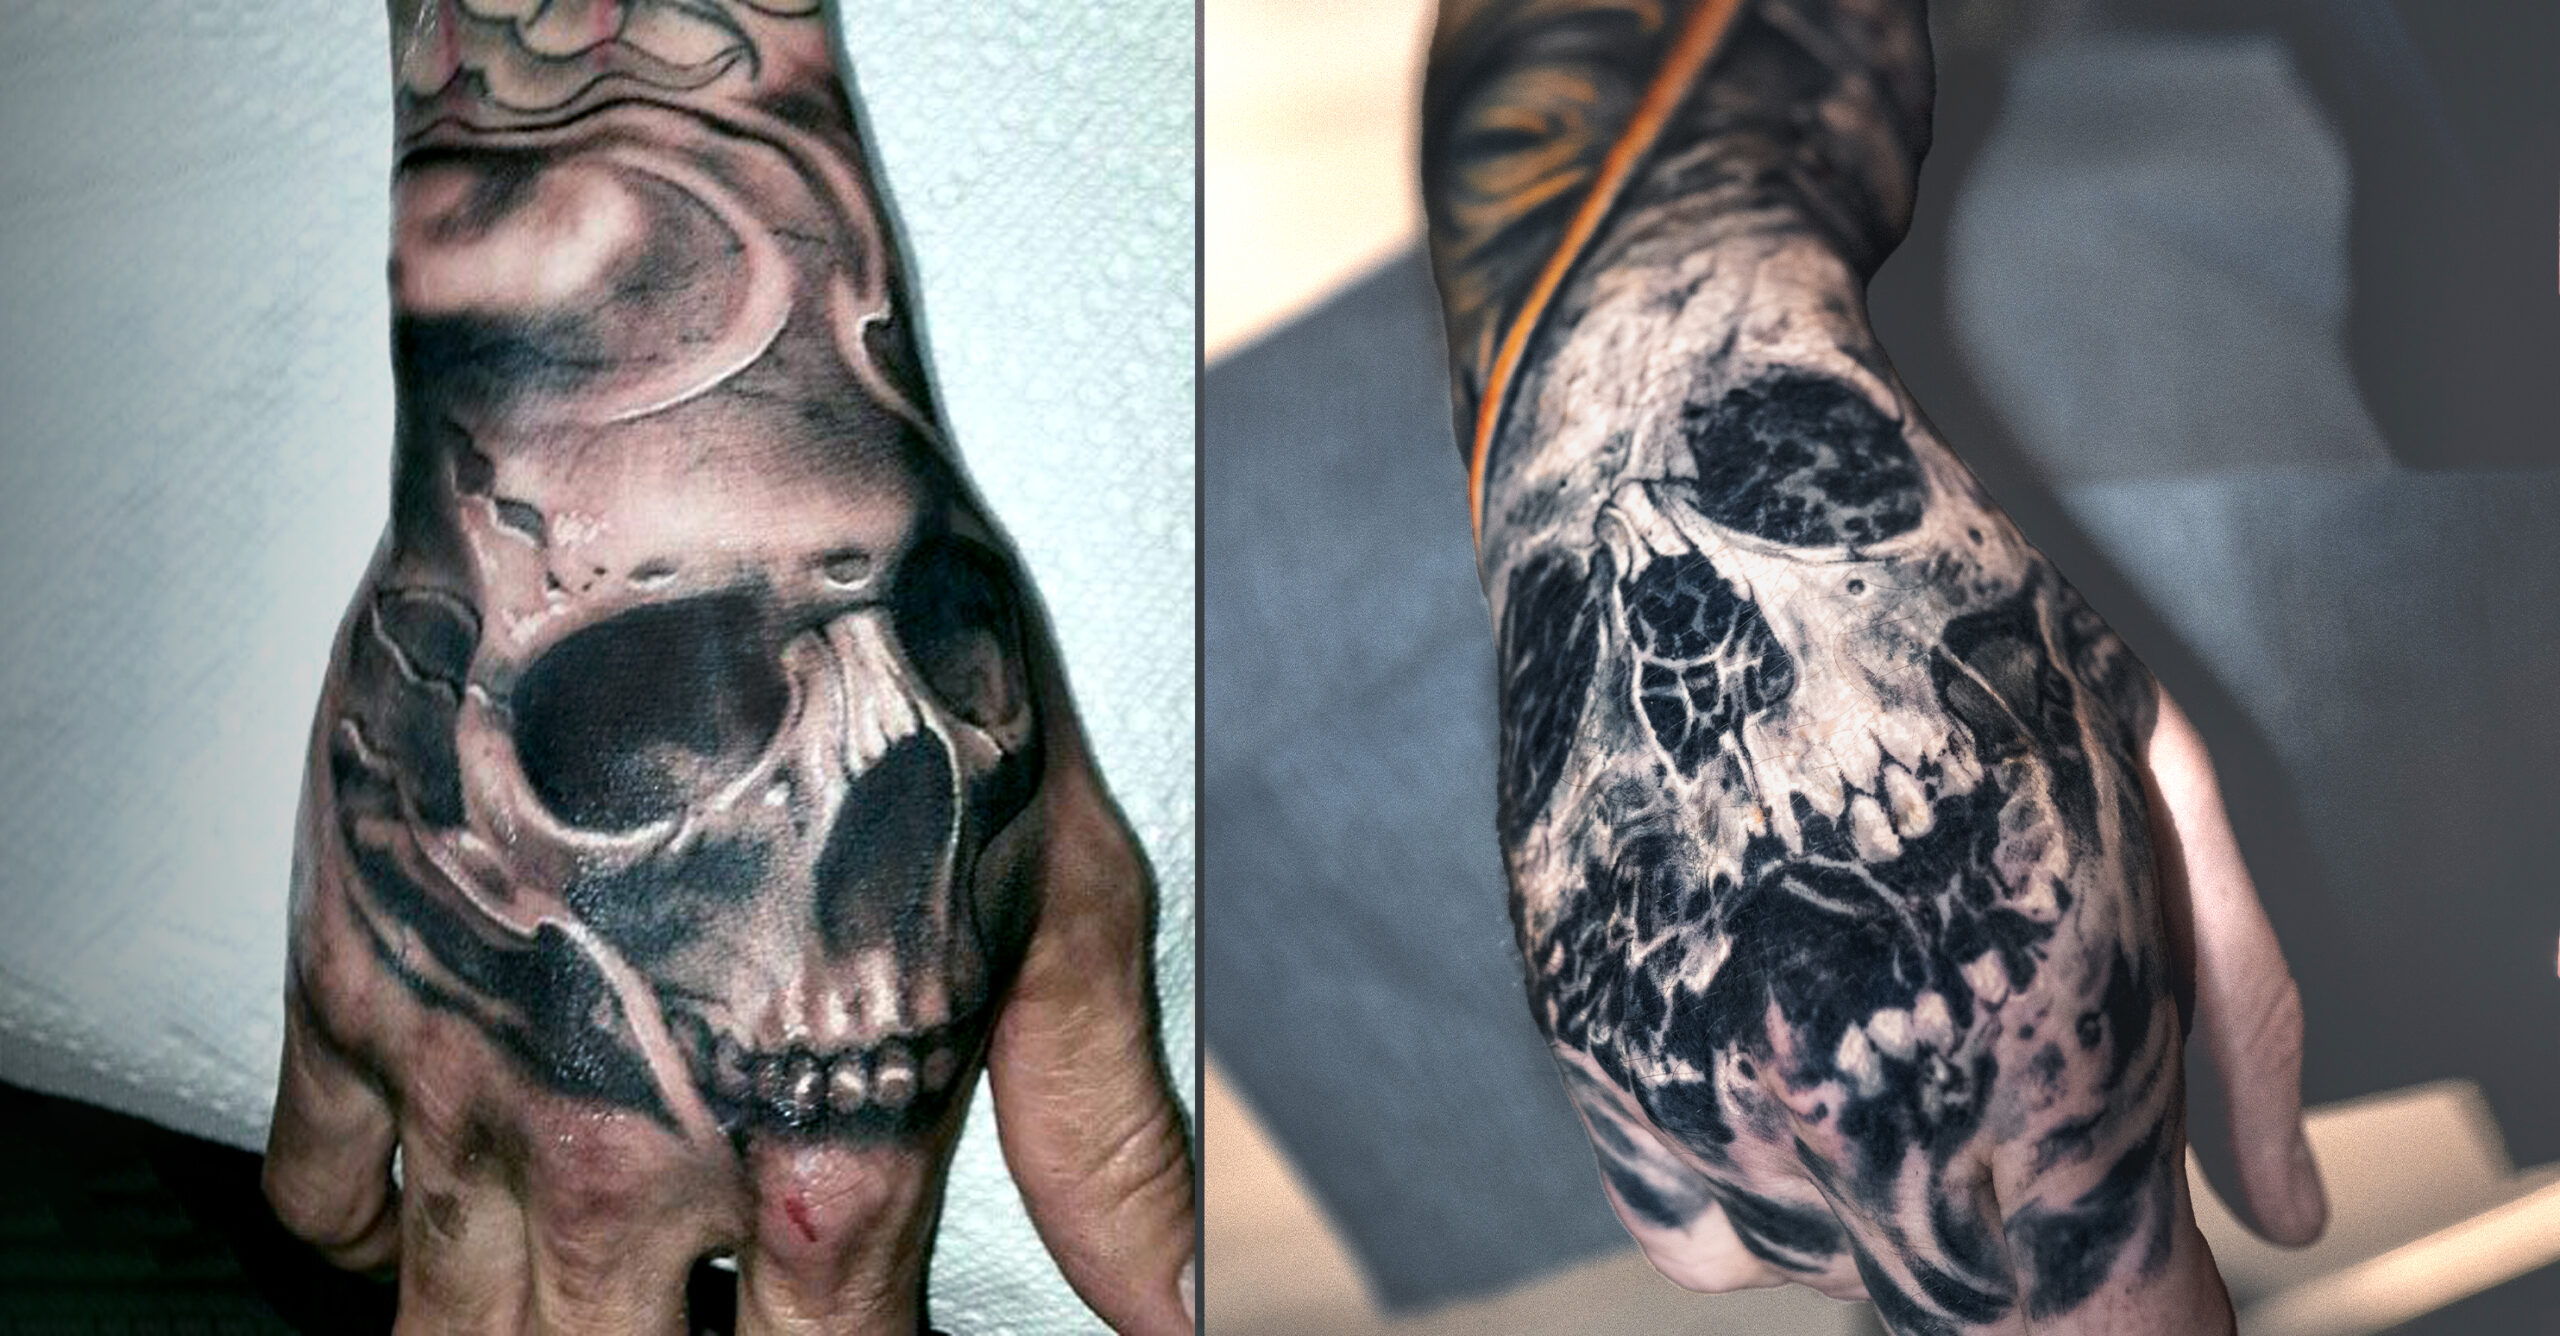 85 Mind-Blowing Sugar Skull Tattoos And Their Meaning - AuthorityTattoo